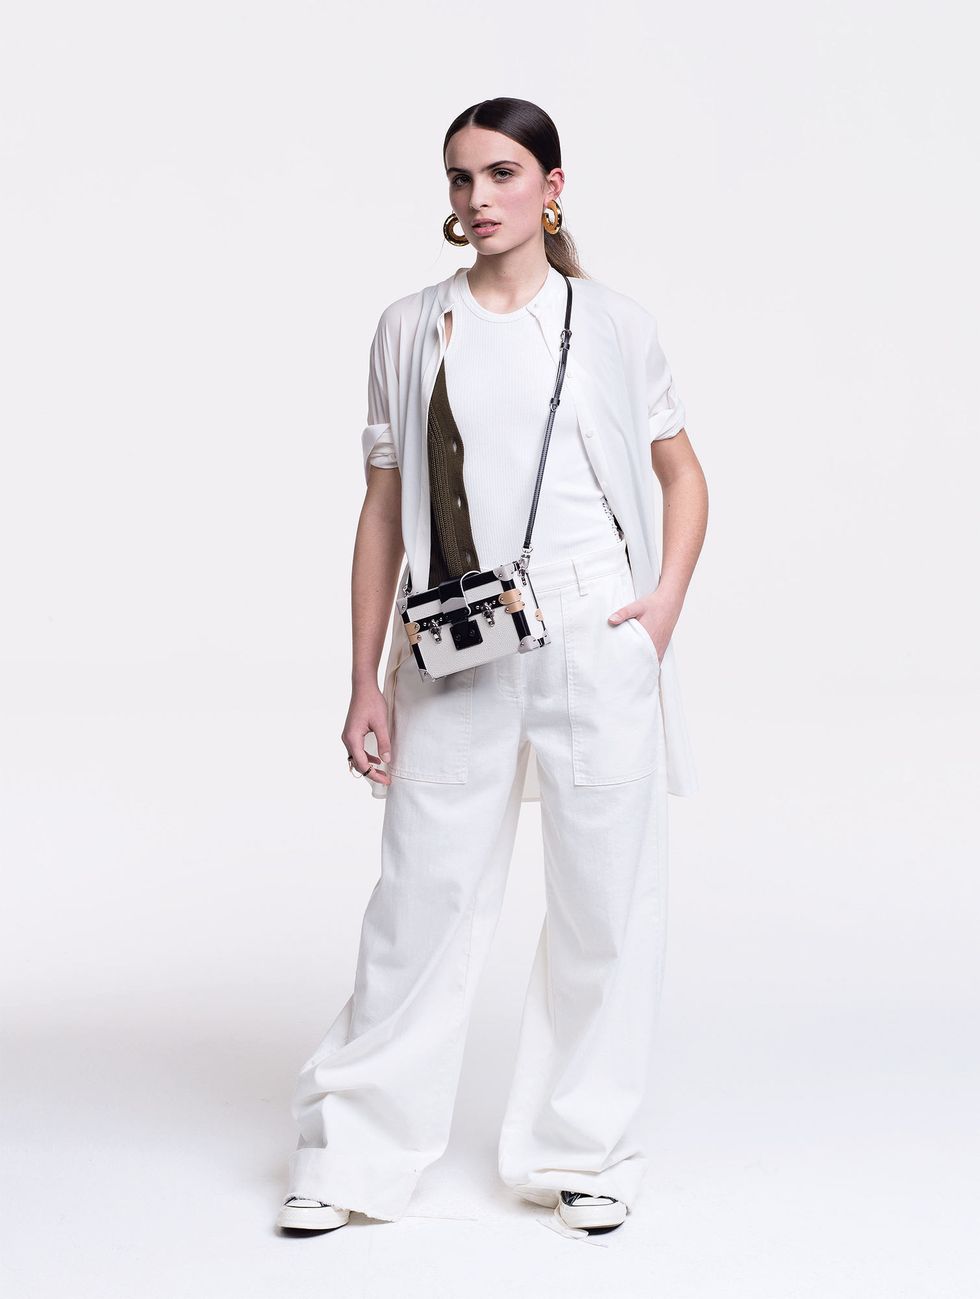 White, Clothing, Shoulder, Fashion, Standing, Neck, Fashion model, Trousers, Outerwear, Waist, 